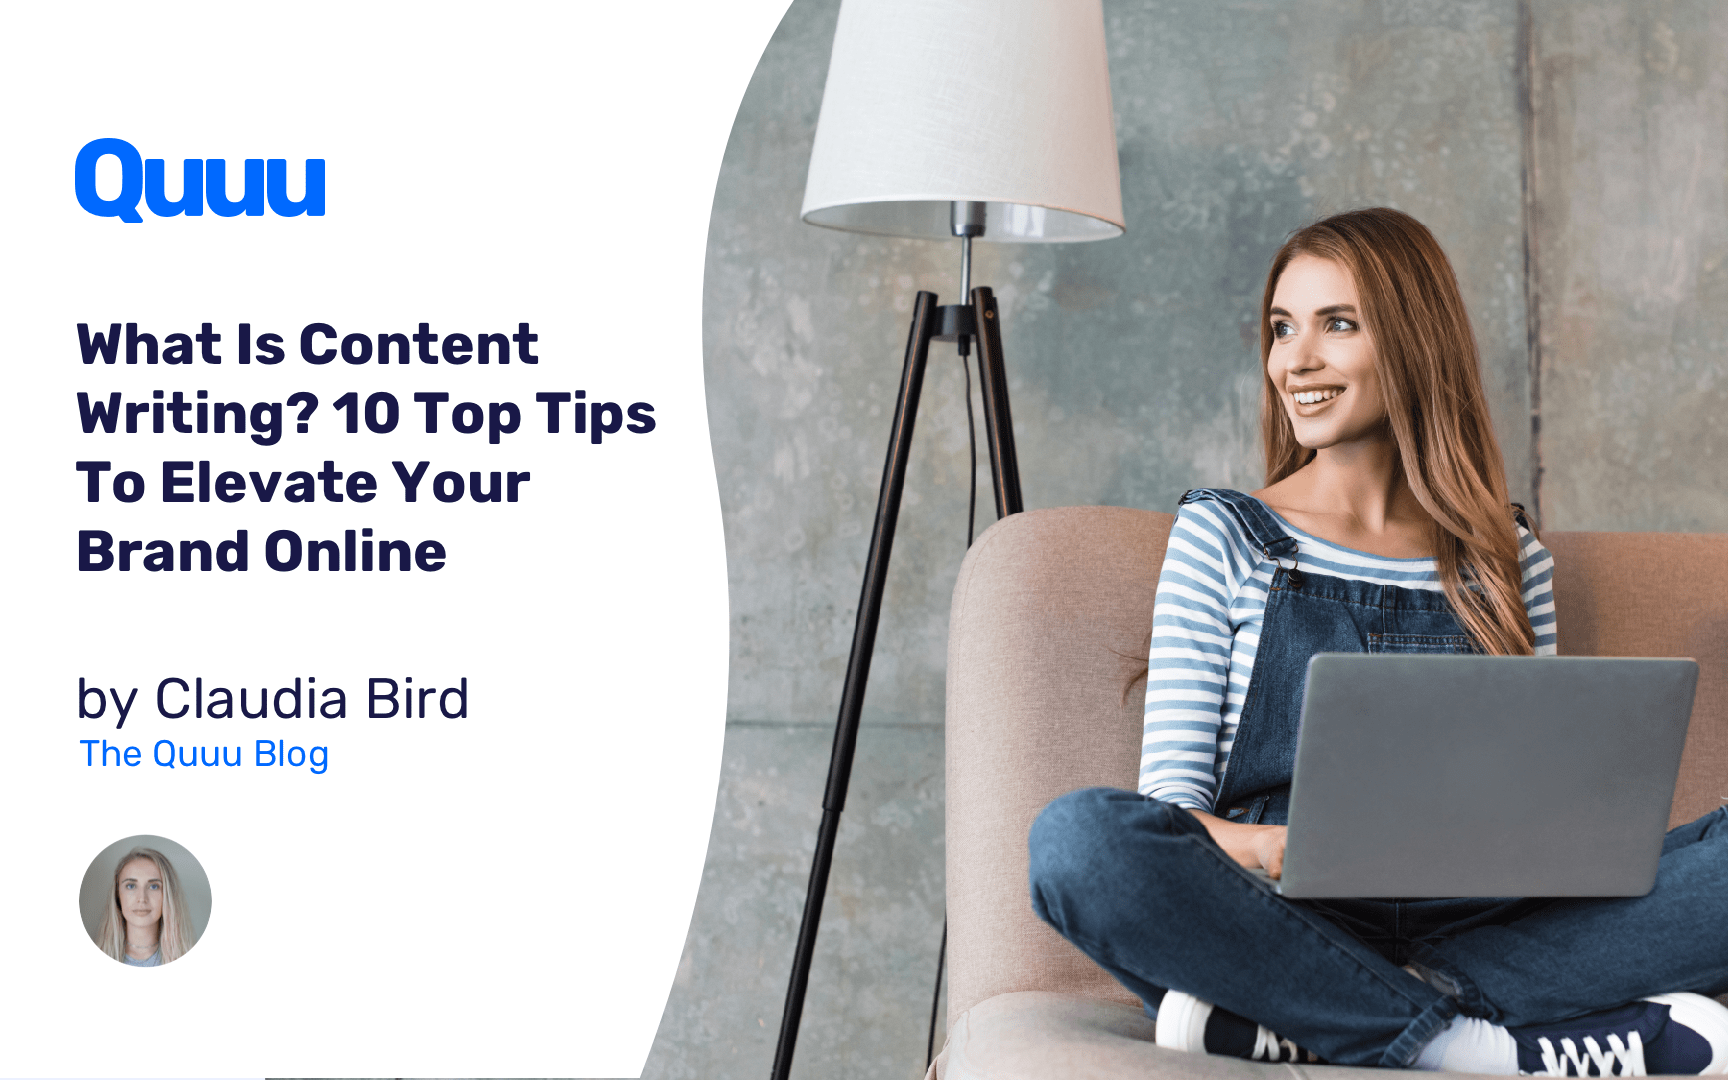 What Is Content Writing? 10 Top Tips To Elevate Your Brand Online